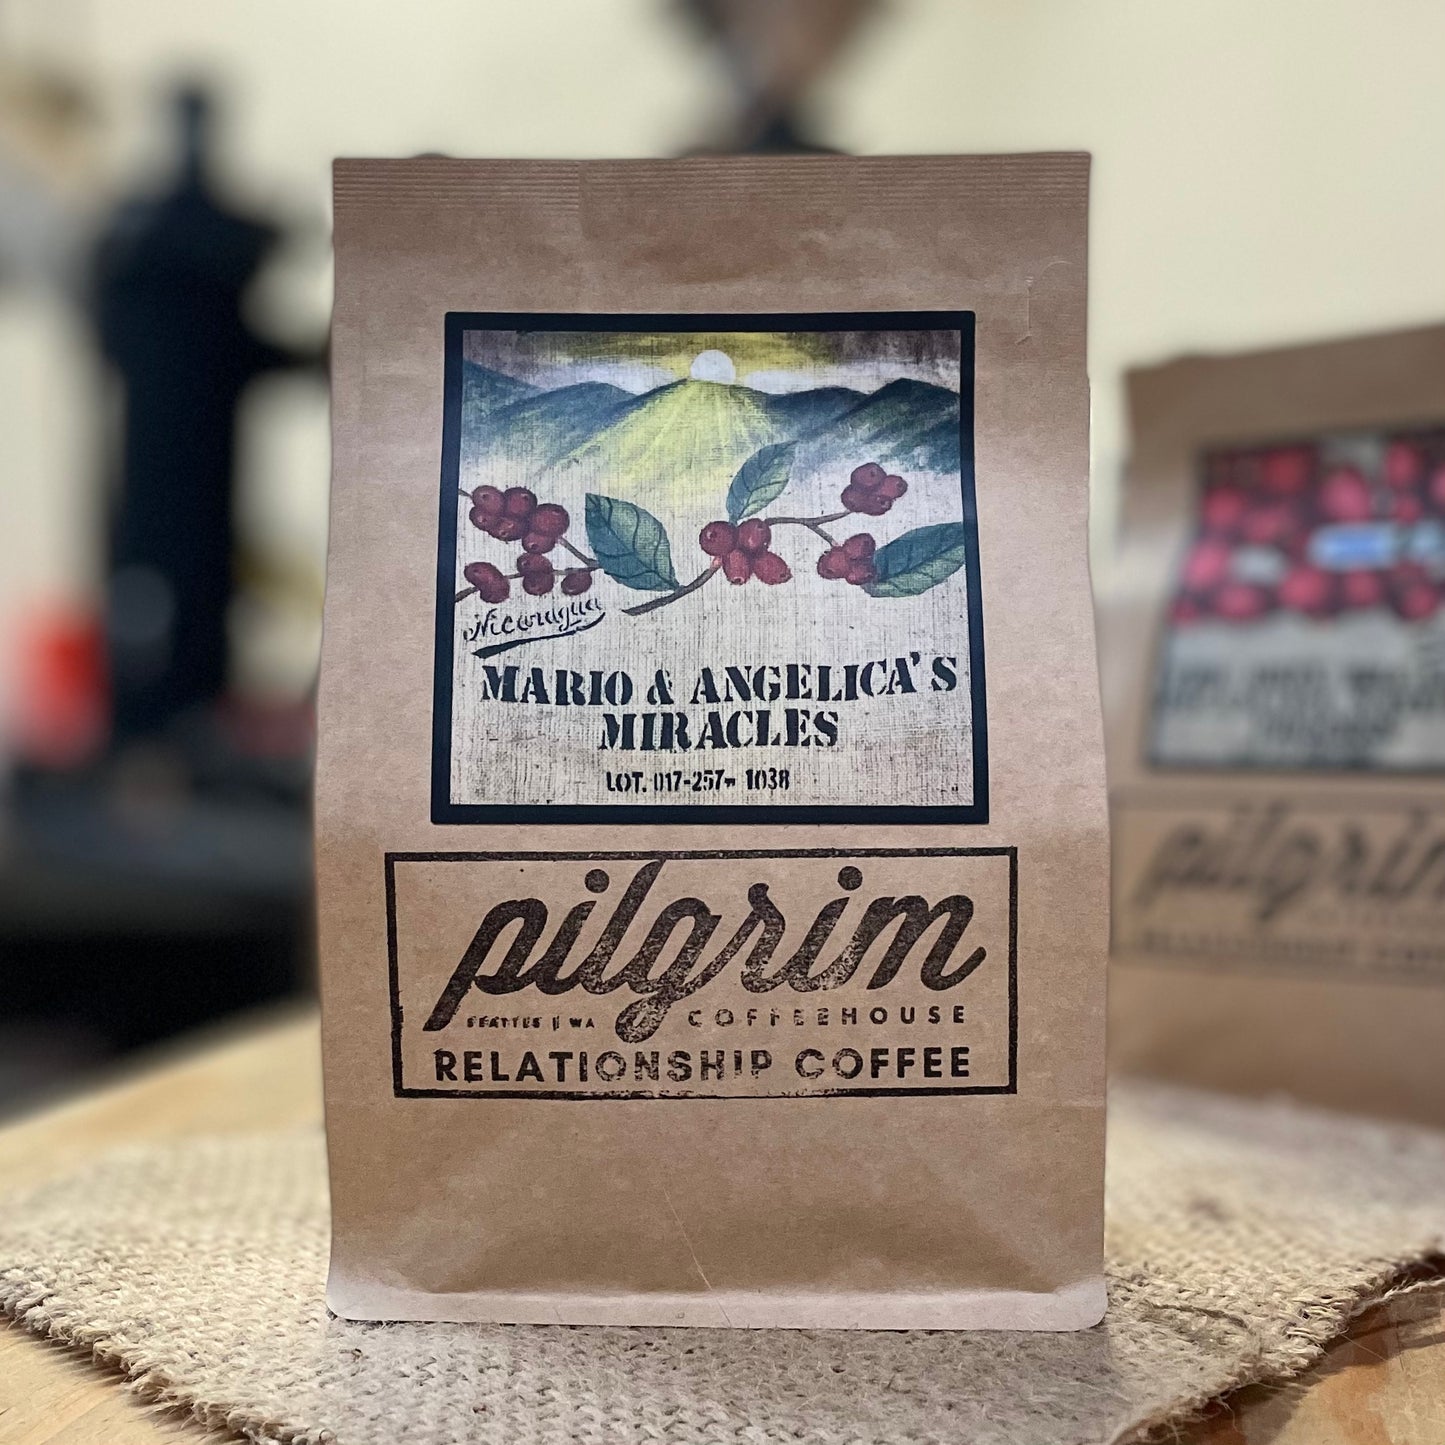 Relationship Coffee Nicaragua Miracles at Pilgrim Coffeehouse